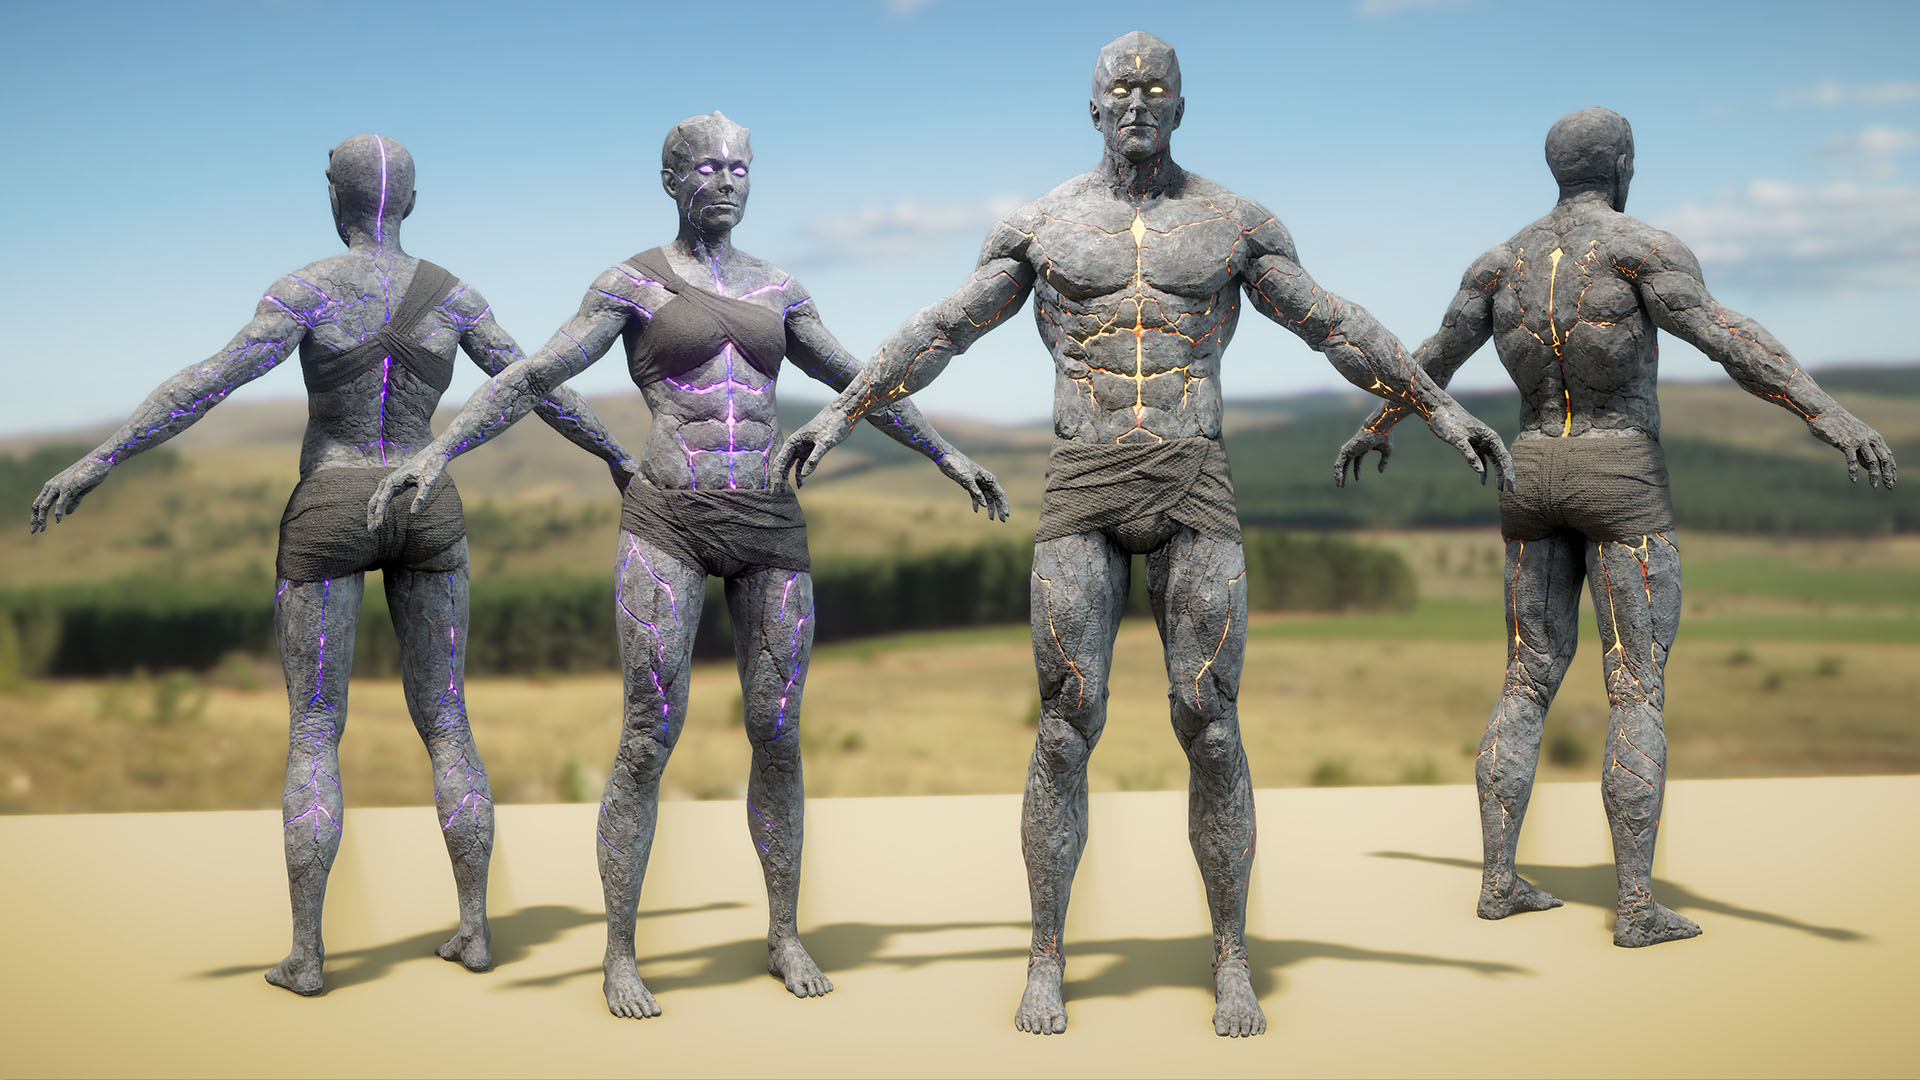 2020-Mar 6: render of female and male Archai character models